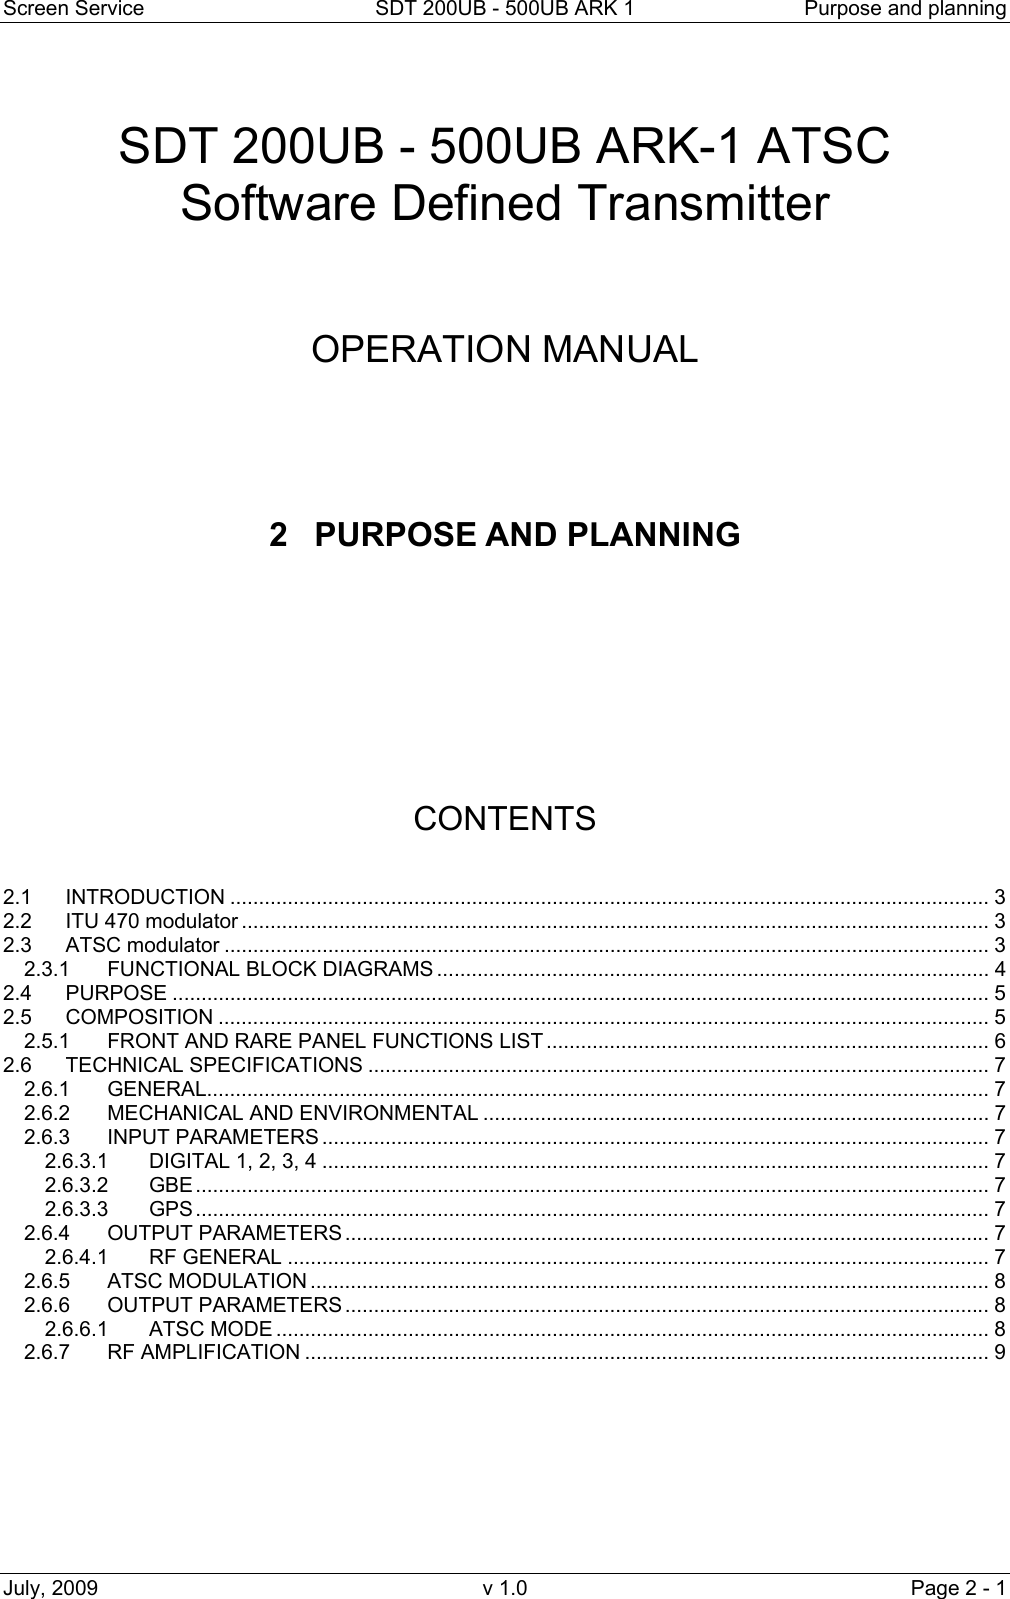 Screen Service  SDT 200UB - 500UB ARK 1  Purpose and planning July, 2009  v 1.0  Page 2 - 1   SDT 200UB - 500UB ARK-1 ATSC Software Defined Transmitter     OPERATION MANUAL      2 PURPOSE AND PLANNING           CONTENTS   2.1 INTRODUCTION .................................................................................................................................... 3 2.2 ITU 470 modulator .................................................................................................................................. 3 2.3 ATSC modulator ..................................................................................................................................... 3 2.3.1 FUNCTIONAL BLOCK DIAGRAMS ................................................................................................ 4 2.4 PURPOSE .............................................................................................................................................. 5 2.5 COMPOSITION ...................................................................................................................................... 5 2.5.1 FRONT AND RARE PANEL FUNCTIONS LIST ............................................................................. 6 2.6 TECHNICAL SPECIFICATIONS ............................................................................................................ 7 2.6.1 GENERAL........................................................................................................................................ 7 2.6.2 MECHANICAL AND ENVIRONMENTAL ........................................................................................ 7 2.6.3 INPUT PARAMETERS .................................................................................................................... 7 2.6.3.1 DIGITAL 1, 2, 3, 4 .................................................................................................................... 7 2.6.3.2 GBE .......................................................................................................................................... 7 2.6.3.3 GPS .......................................................................................................................................... 7 2.6.4 OUTPUT PARAMETERS ................................................................................................................ 7 2.6.4.1 RF GENERAL .......................................................................................................................... 7 2.6.5 ATSC MODULATION ...................................................................................................................... 8 2.6.6 OUTPUT PARAMETERS ................................................................................................................ 8 2.6.6.1 ATSC MODE ............................................................................................................................ 8 2.6.7 RF AMPLIFICATION ....................................................................................................................... 9        